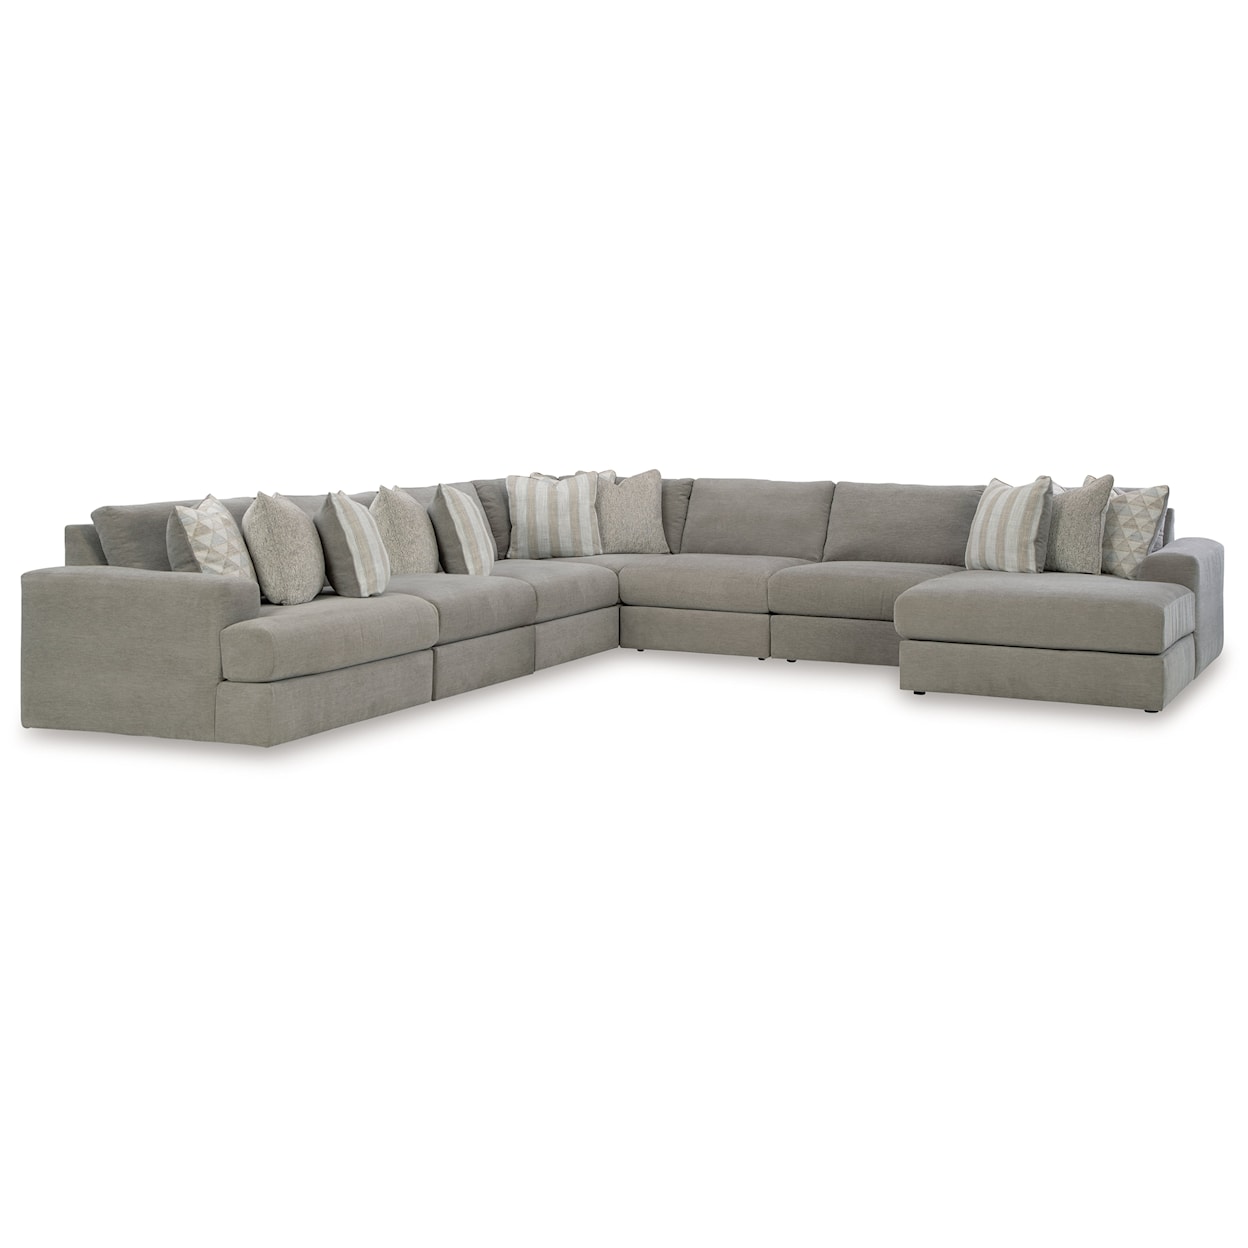 Ashley Furniture Signature Design Avaliyah 7-Piece Sectional With Chaise